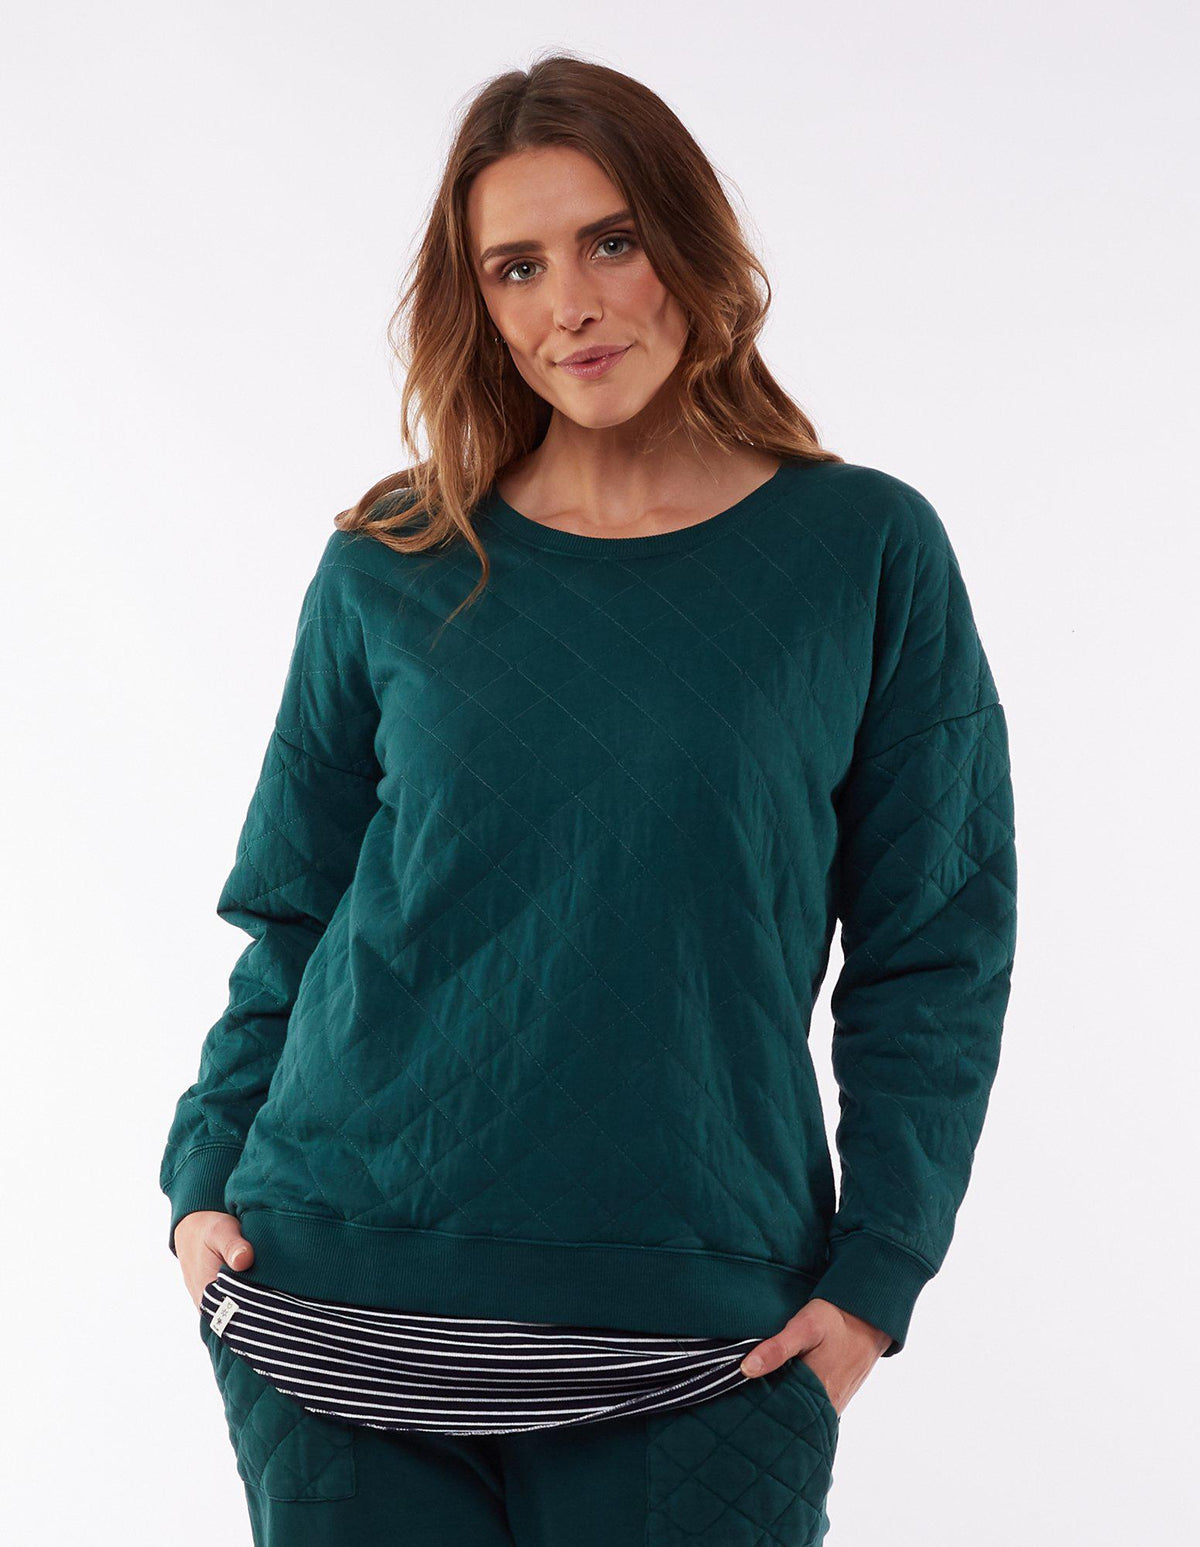 Becky Quilted Crew - Alpine Green - Elm Lifestyle - FUDGE Gifts Home Lifestyle